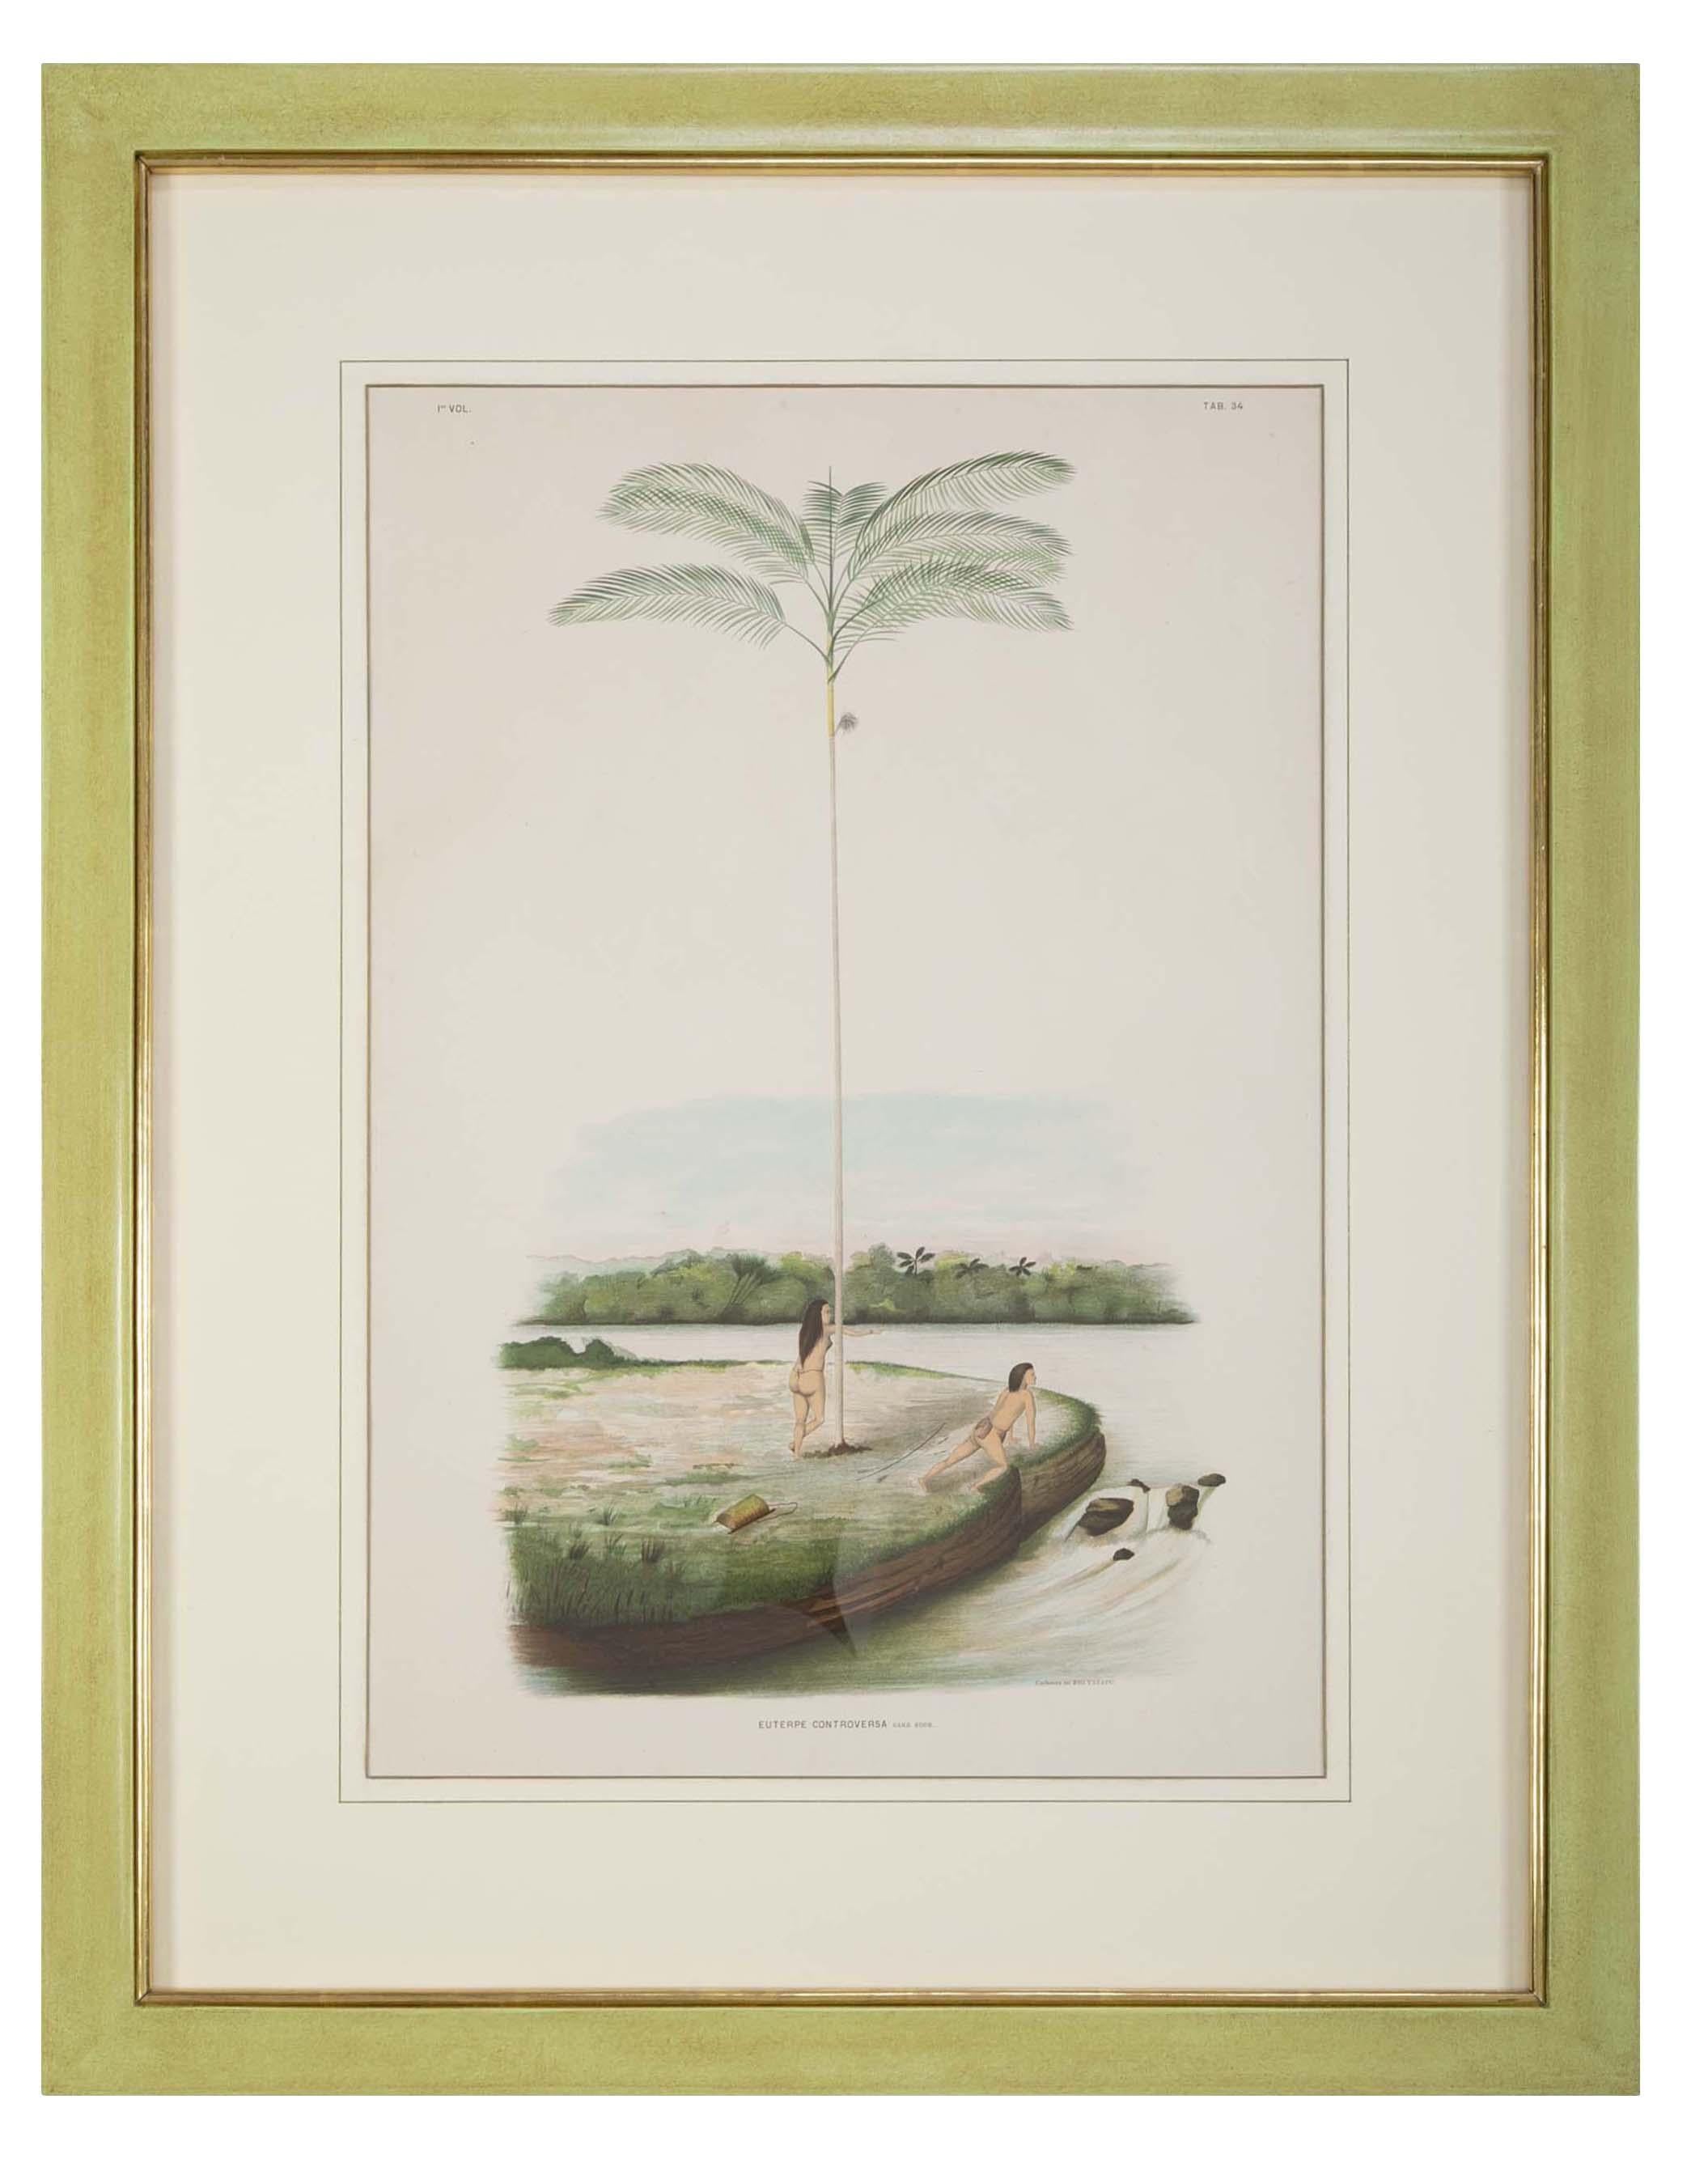 A set of four chromolithographs of Brazilian palms and natives with palms by Joao Barbosa Rodrigues.
Handmade unique frames with gold fillets.

Can be sold separately for $ 2,500 each.